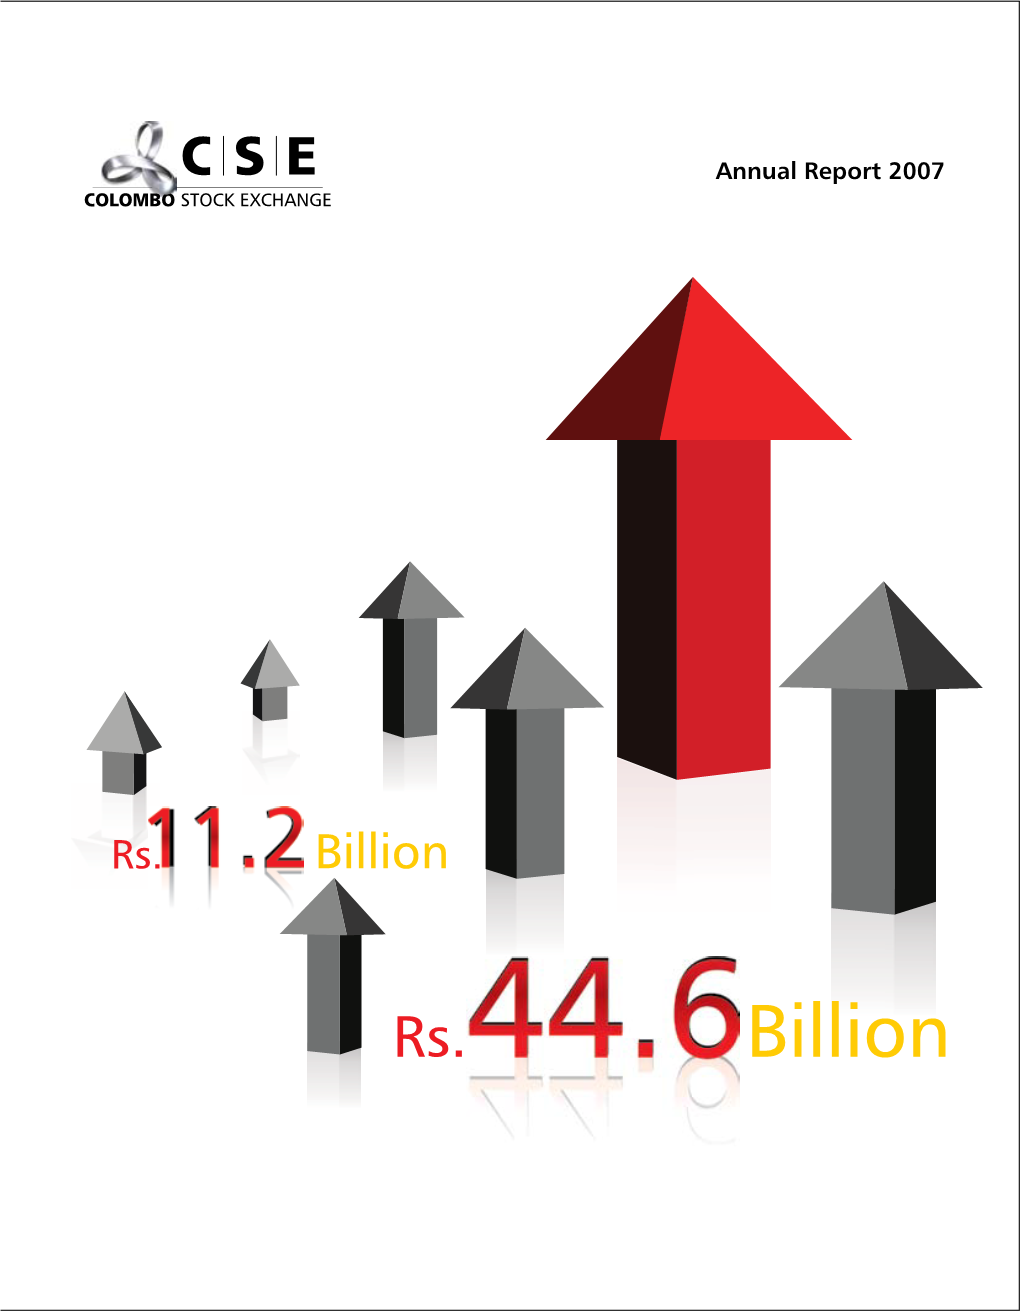 Annual Report 2007 Colombo Stock Exchange Annual Report 2007